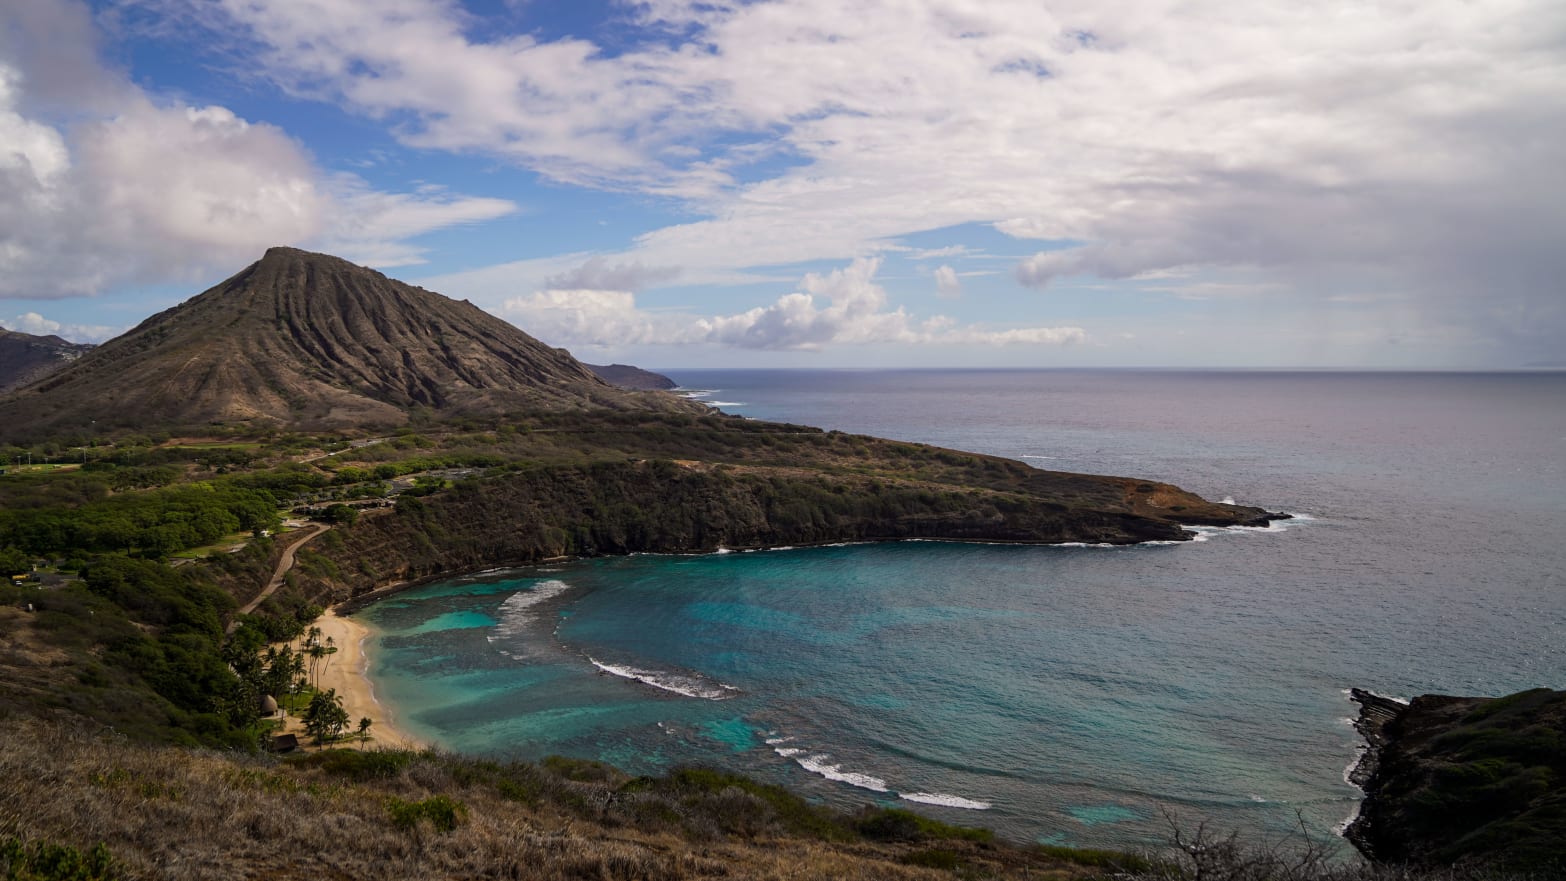 A view of Hanauma Bay with Koko Head in the background from a hiking trail overlooking the popular Nature Preserve